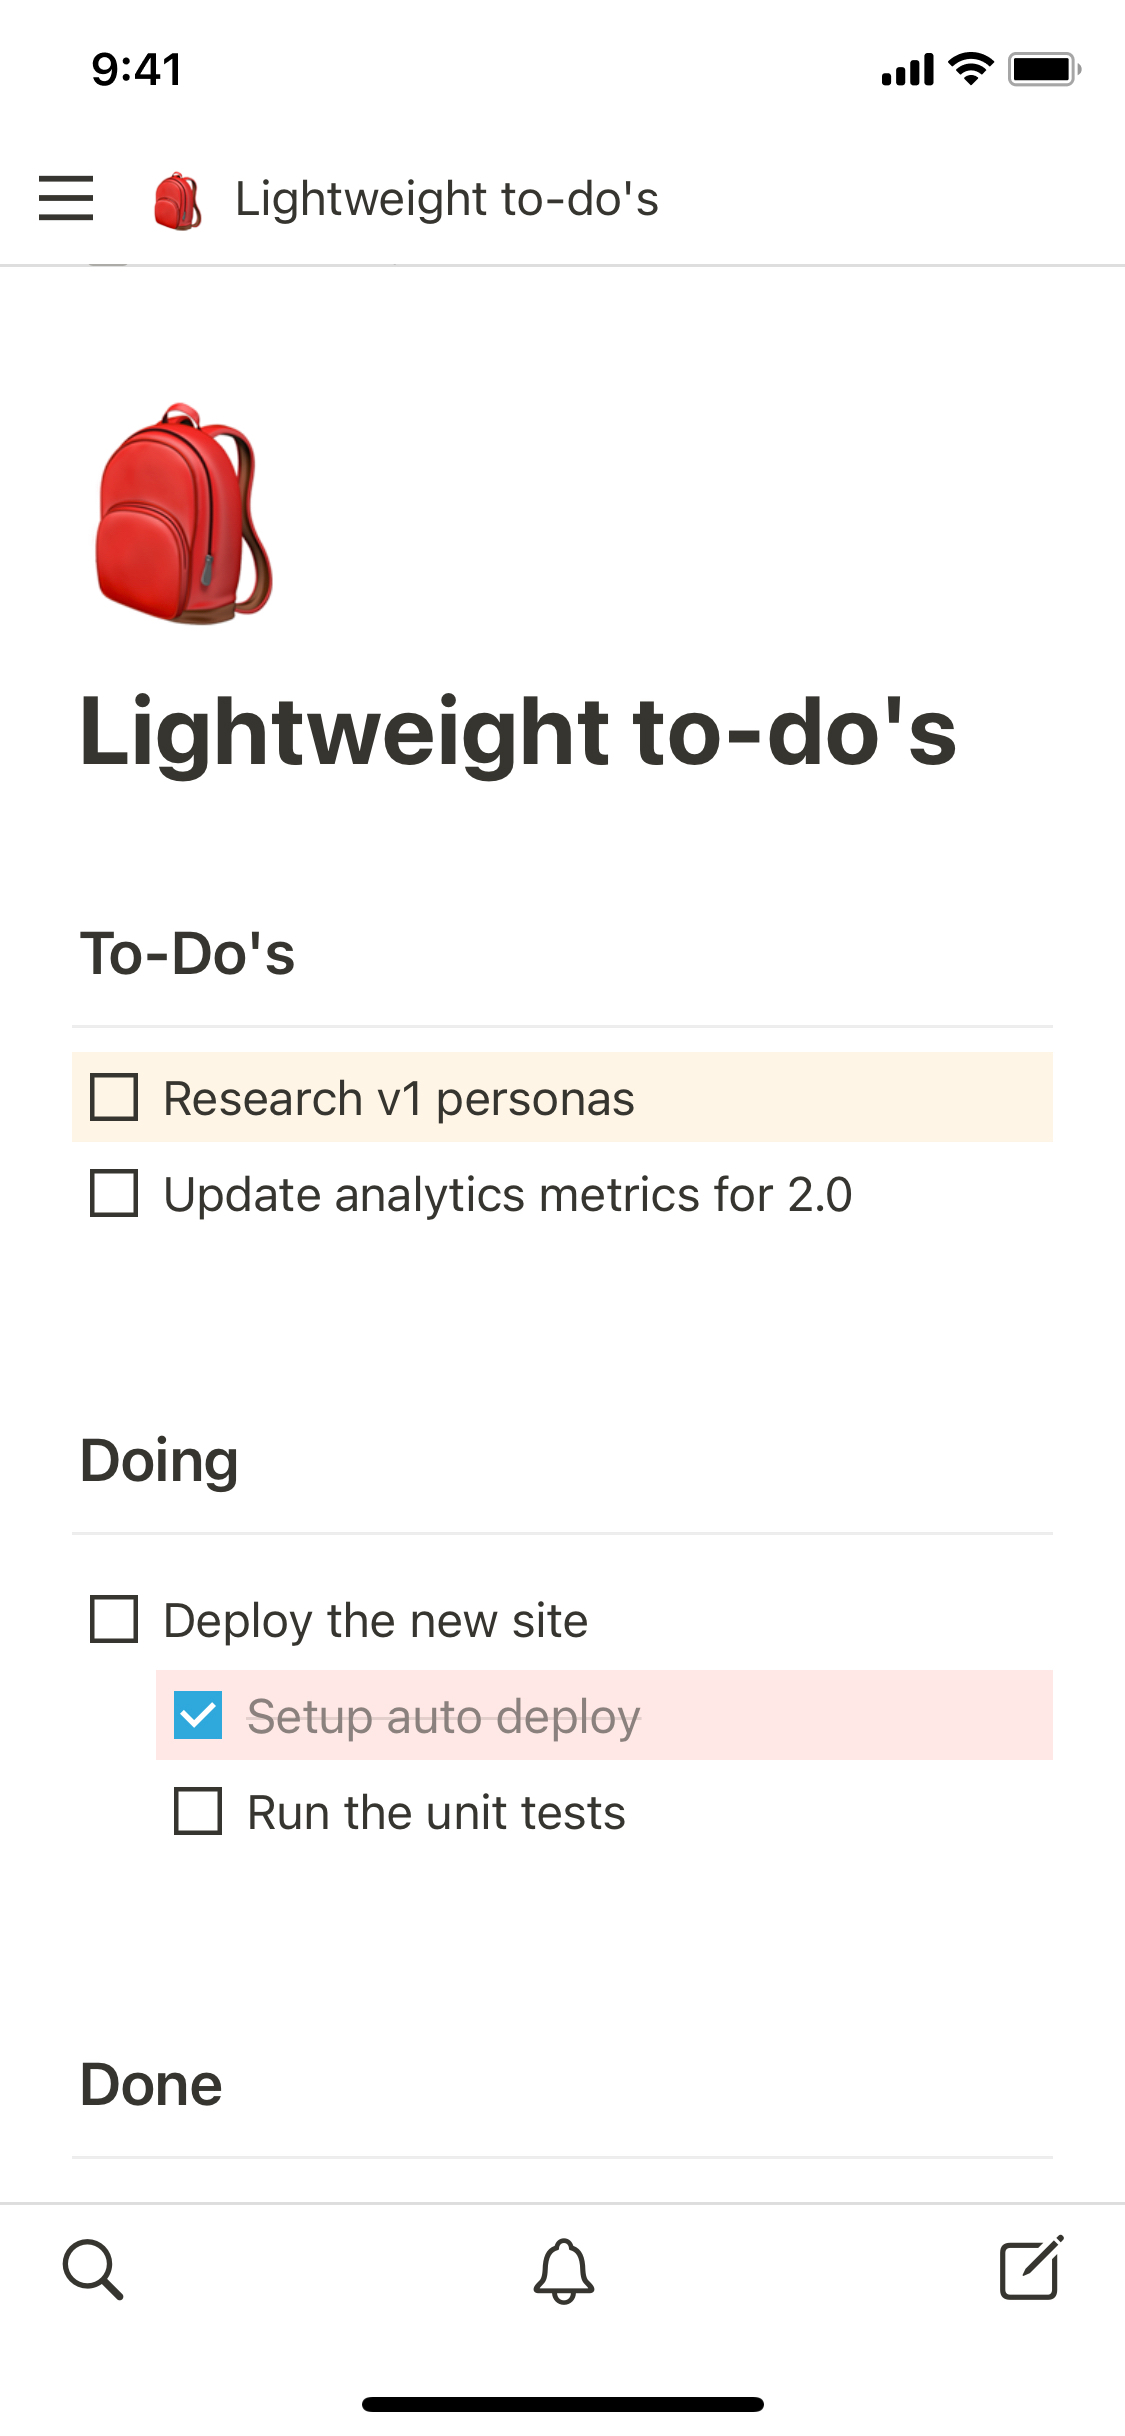 The mobile image for the Lightweight to-do's template